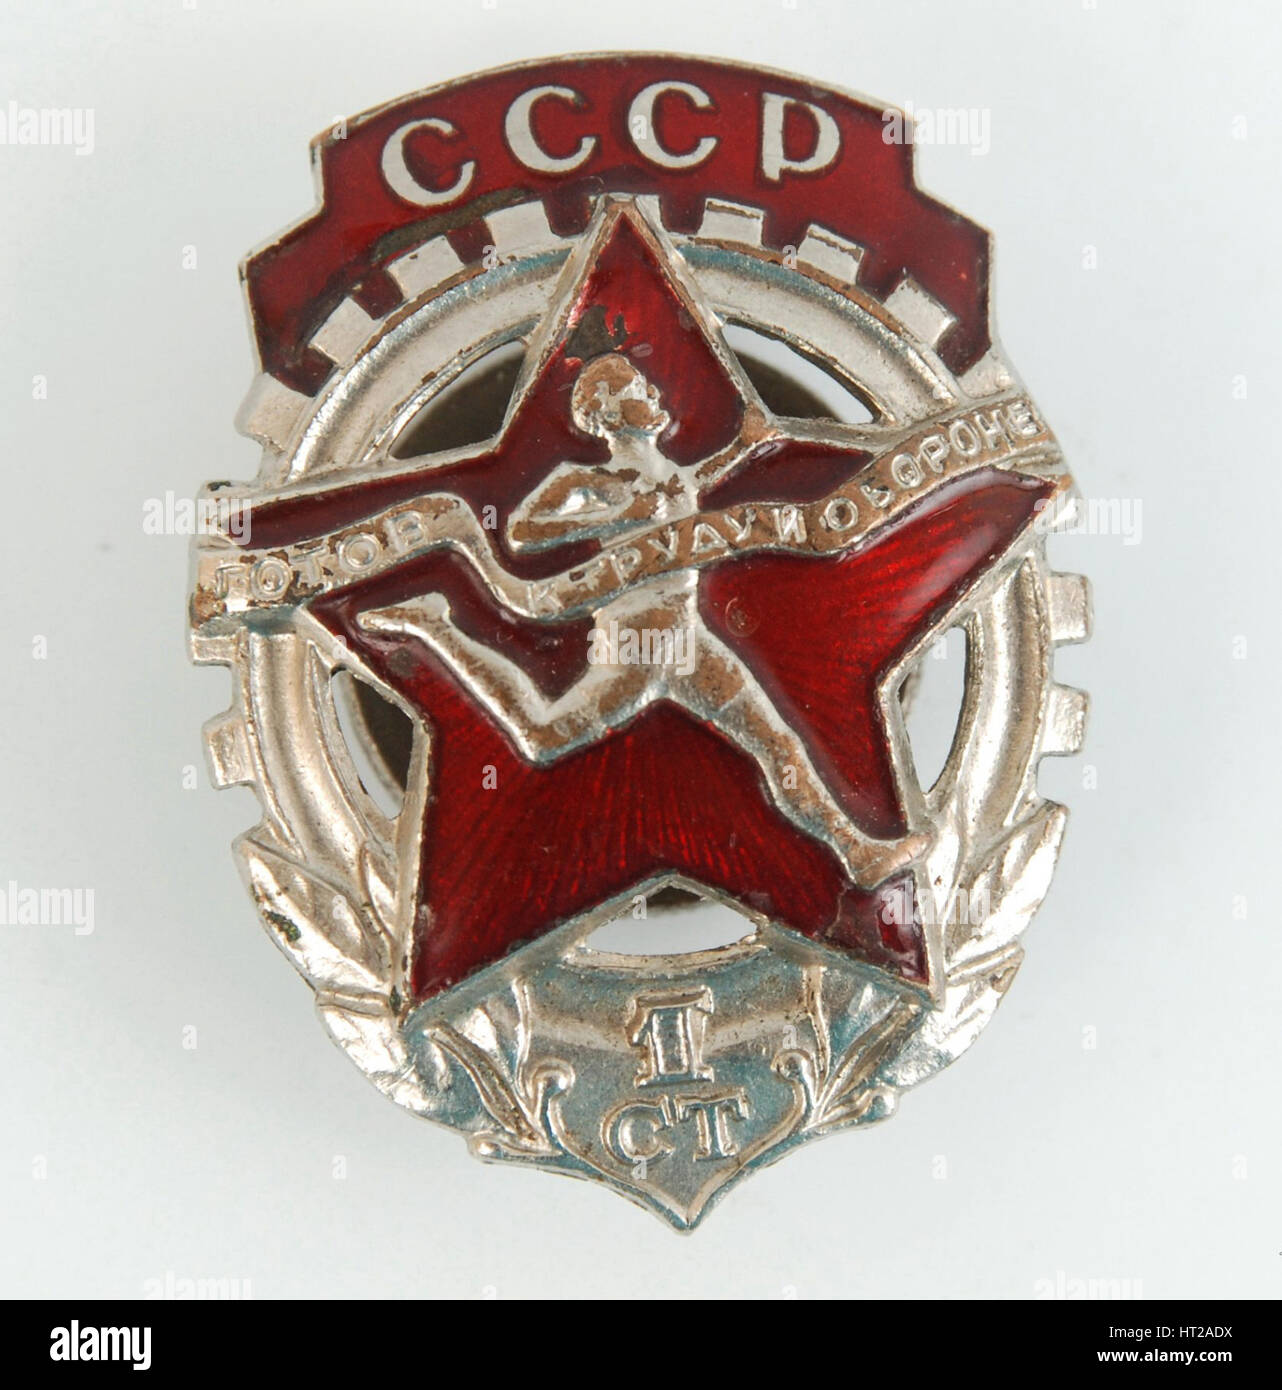 Ready for Labour and Defence of the USSR (GTO). Badge, 1930s. Artist: Orders, decorations and medals Stock Photo